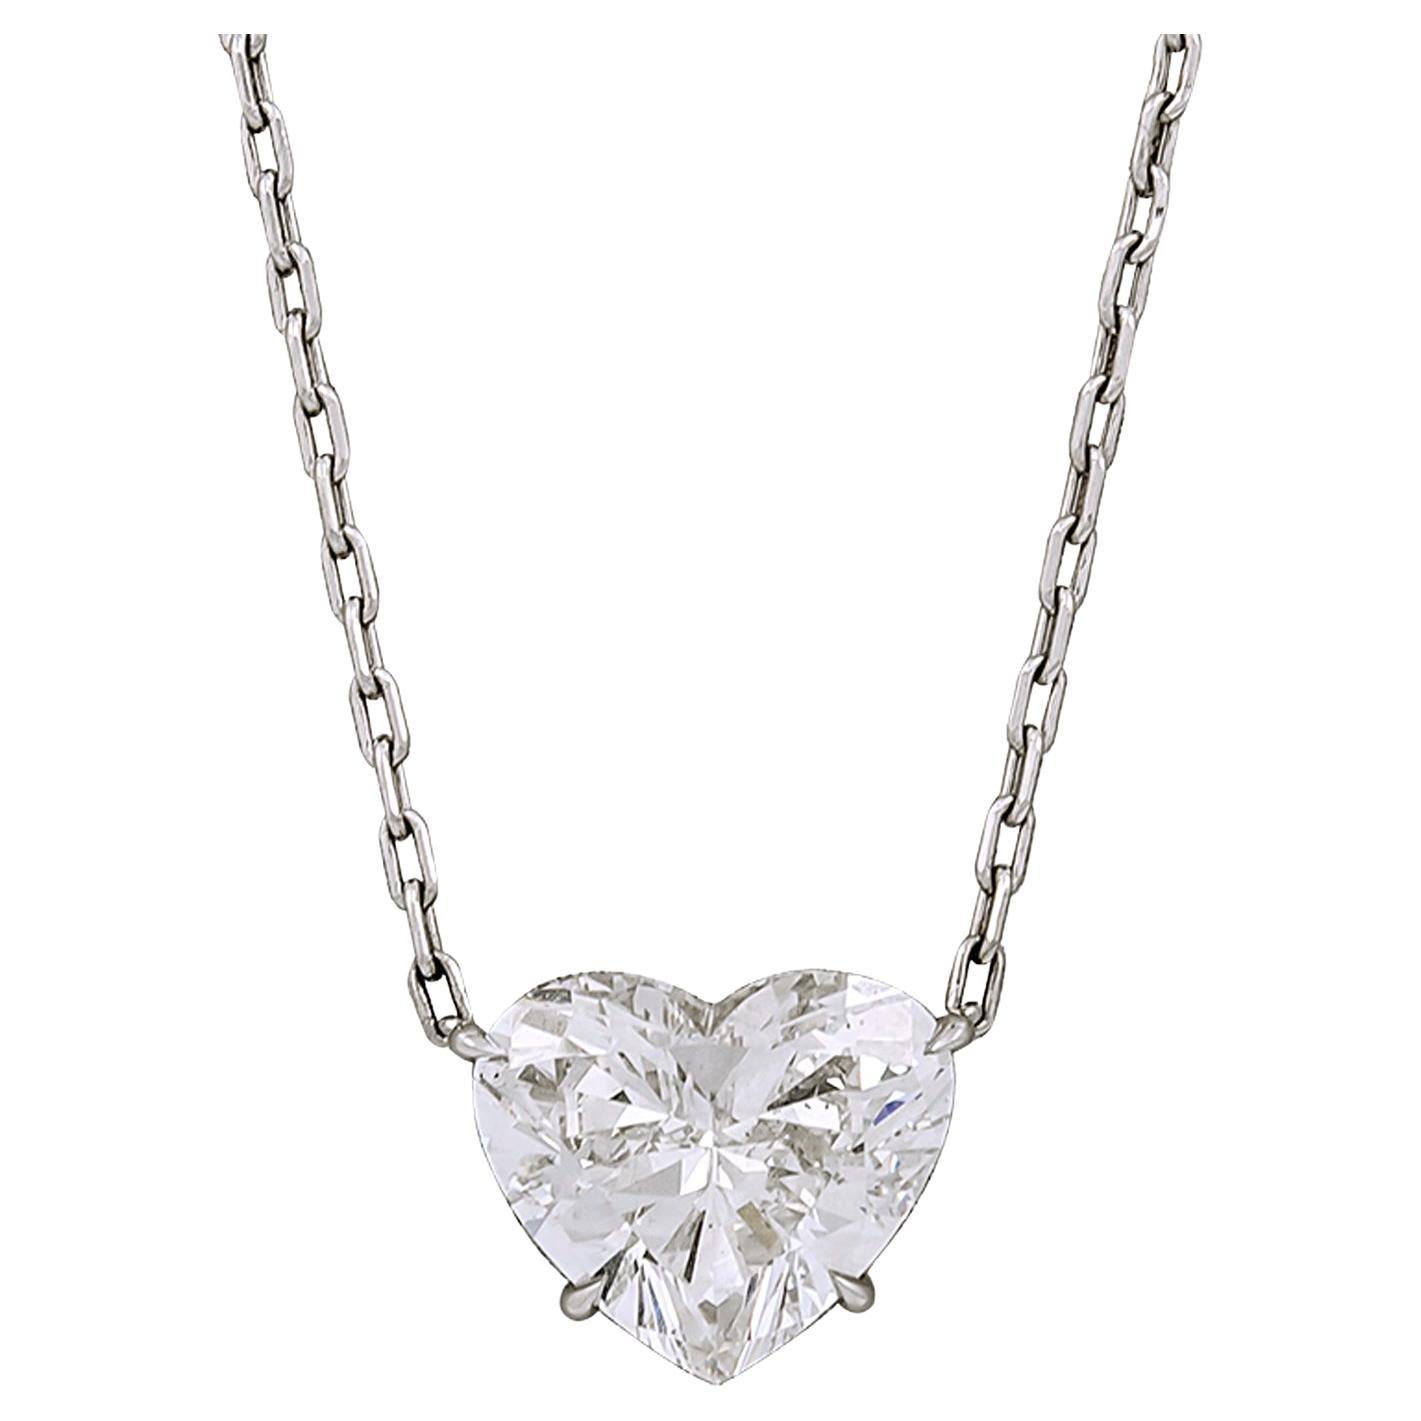 Spectra Fine Jewelry GIA Certified 11.14 Carat Heart-Shaped Diamond Necklace For Sale